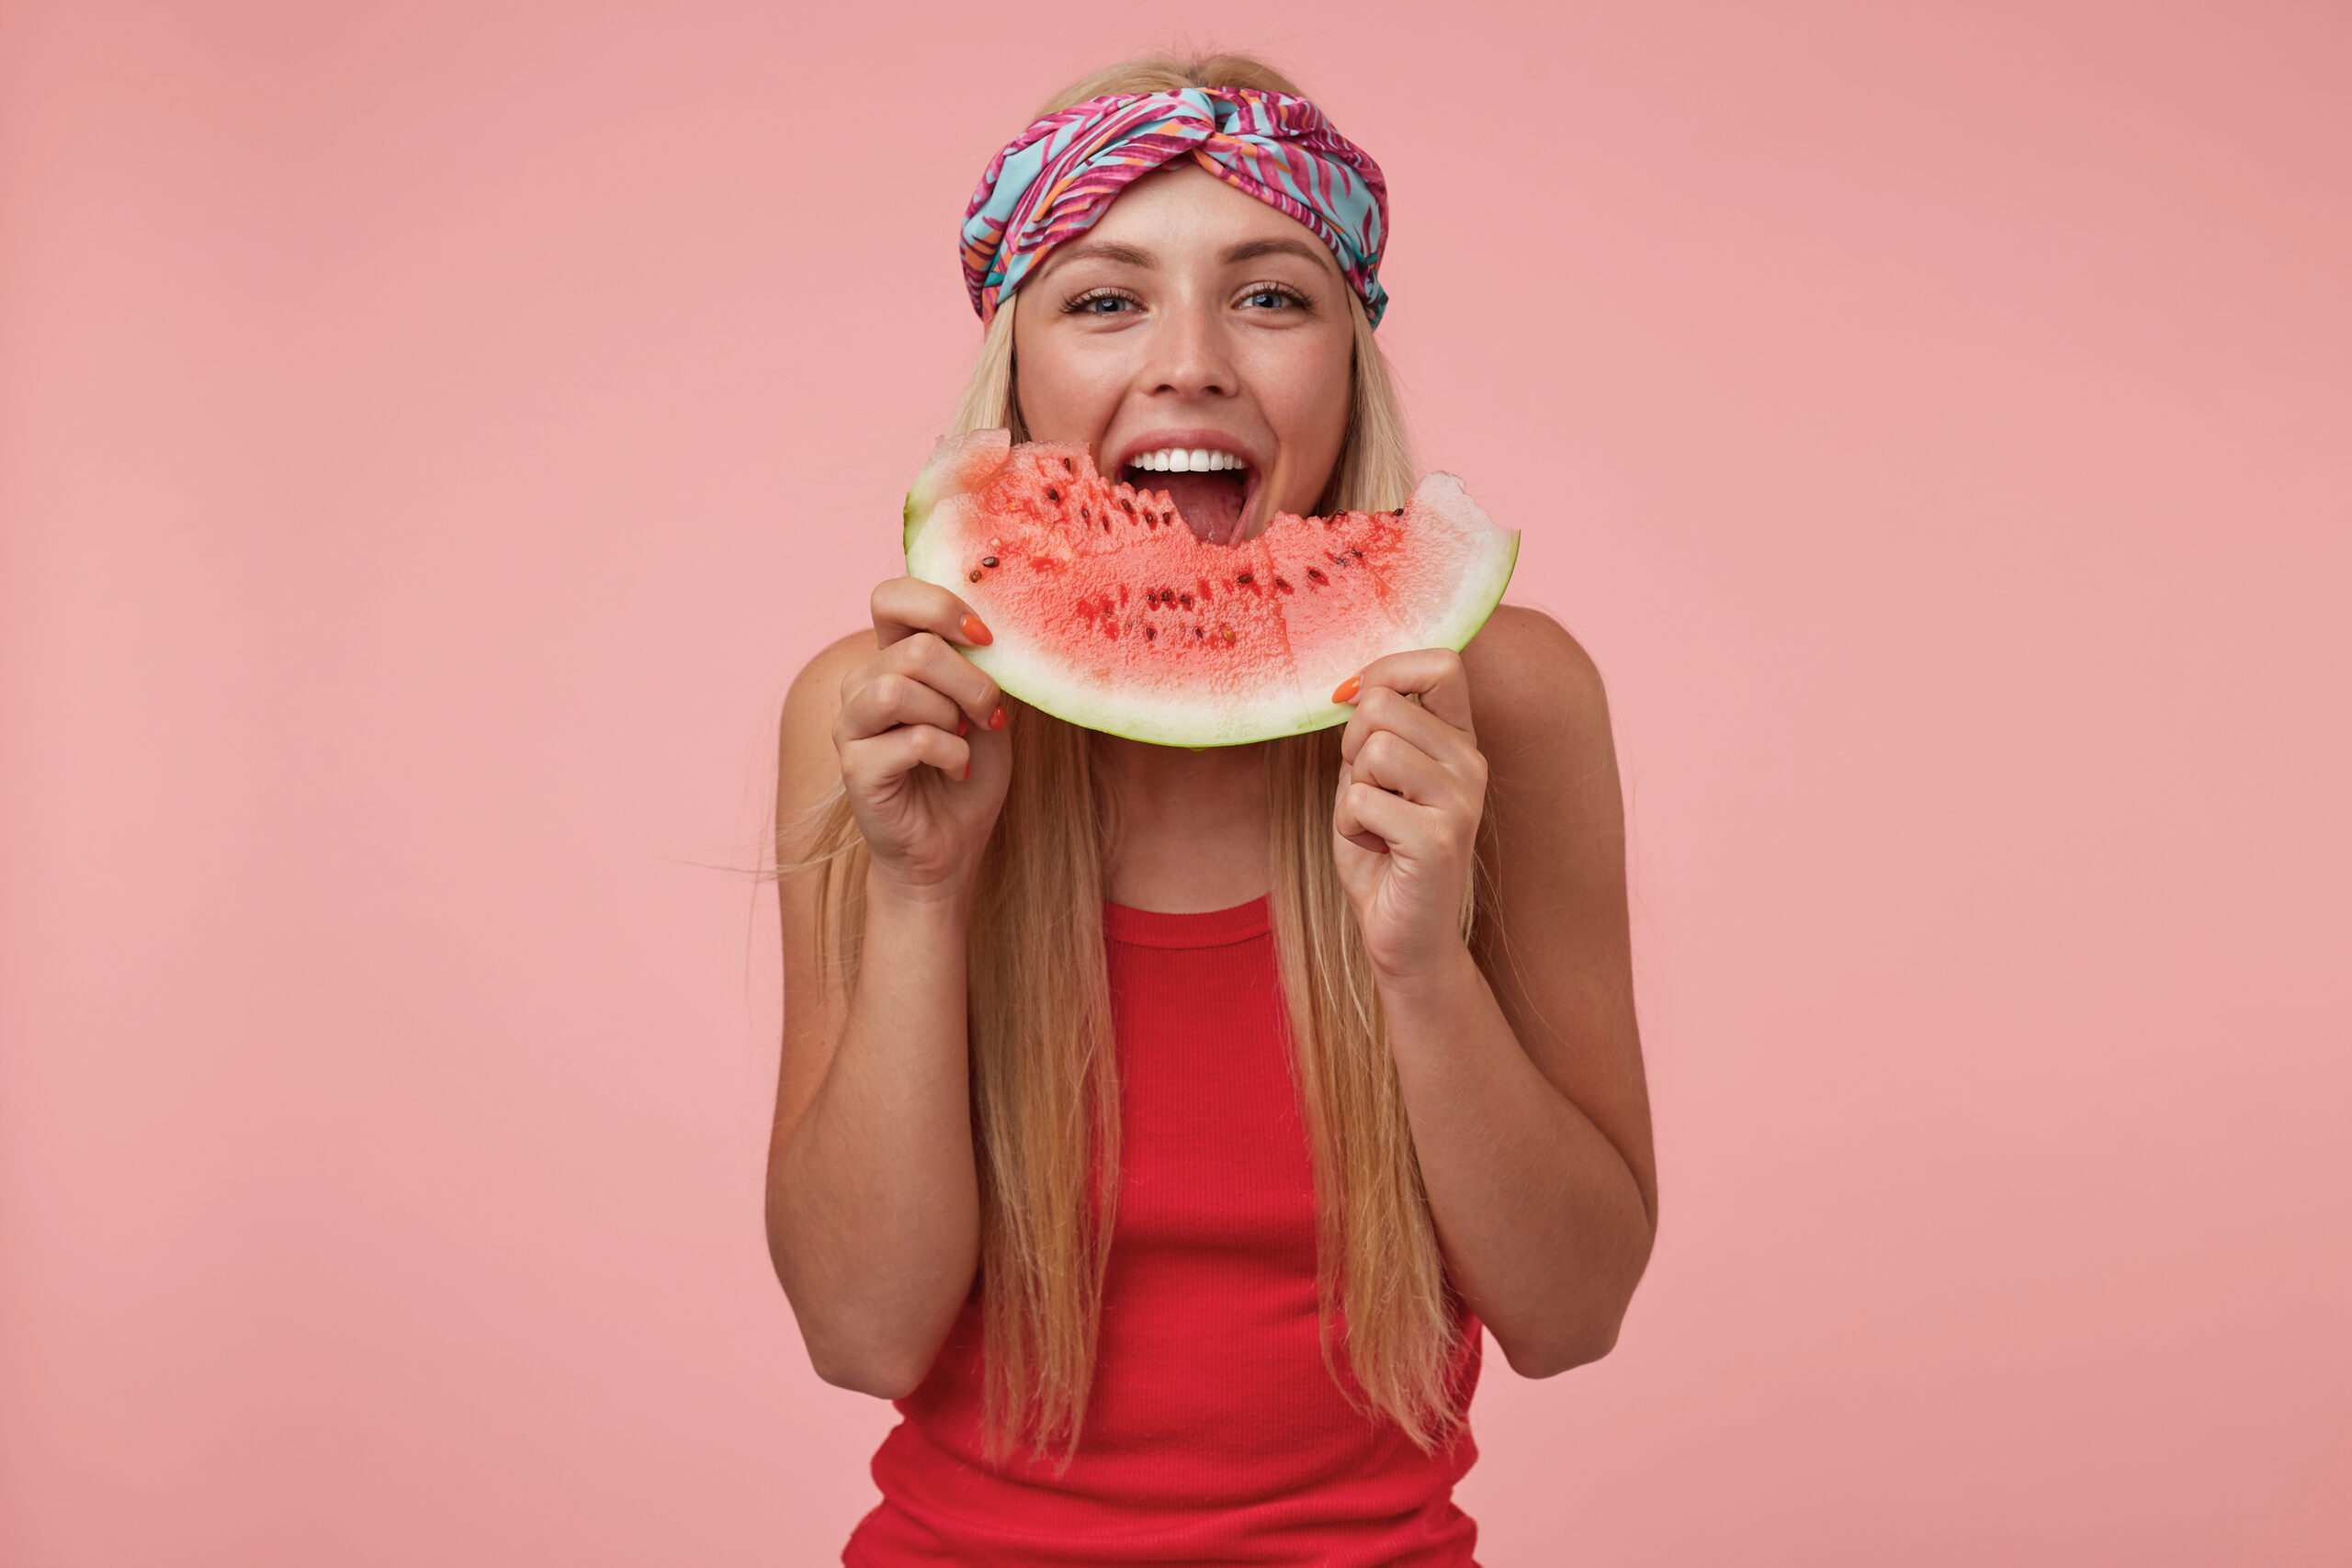 Indoor shot of joyful pretty female with headband and long blonde hair posing over pink background, eating watermelon, being in nice mood